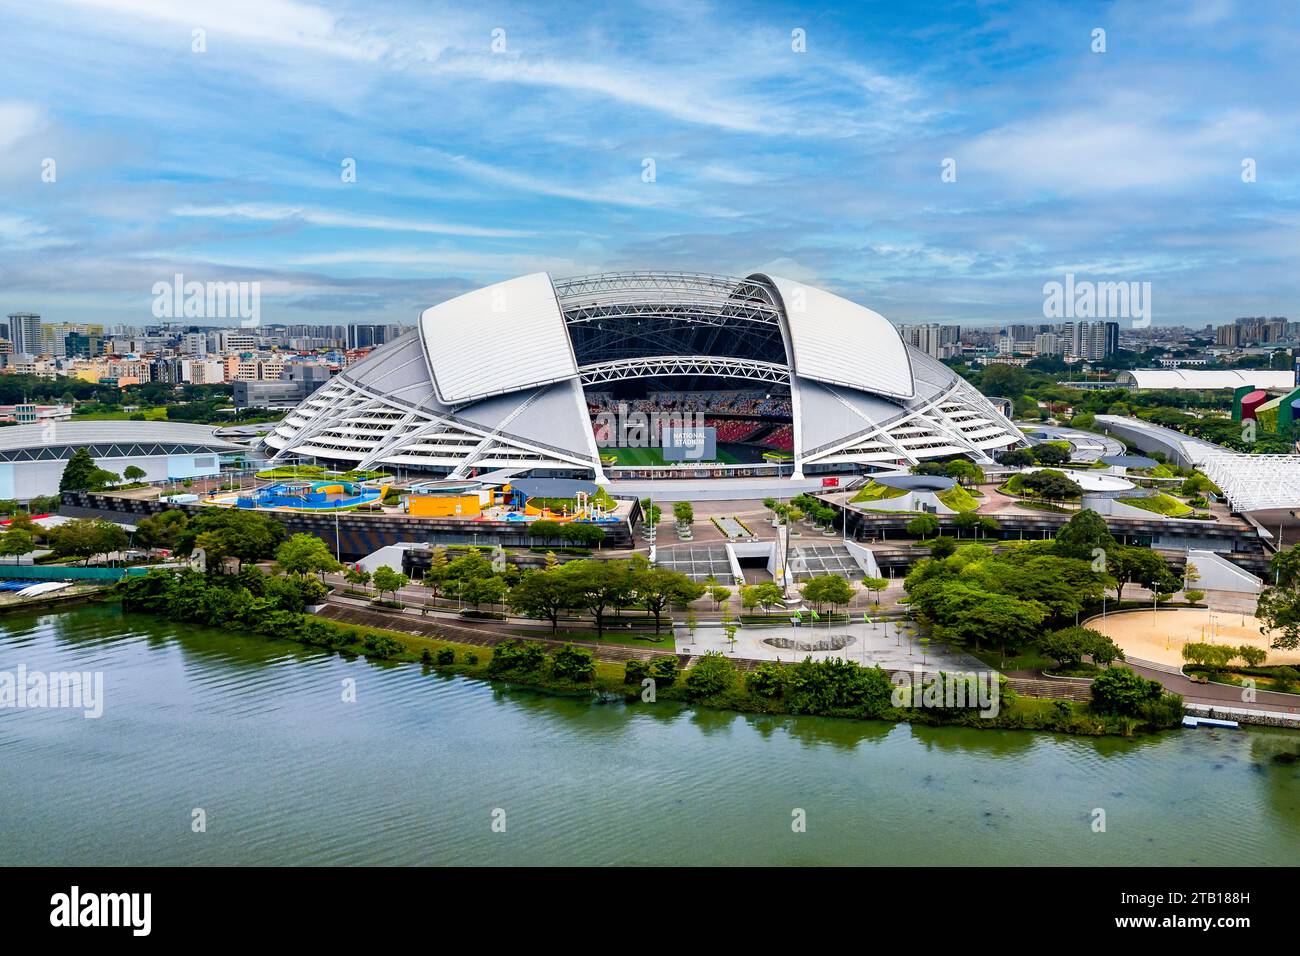 Aerial view of the Singapore National Stadium located next to the Kallang Basin and reservoir Stock Photo